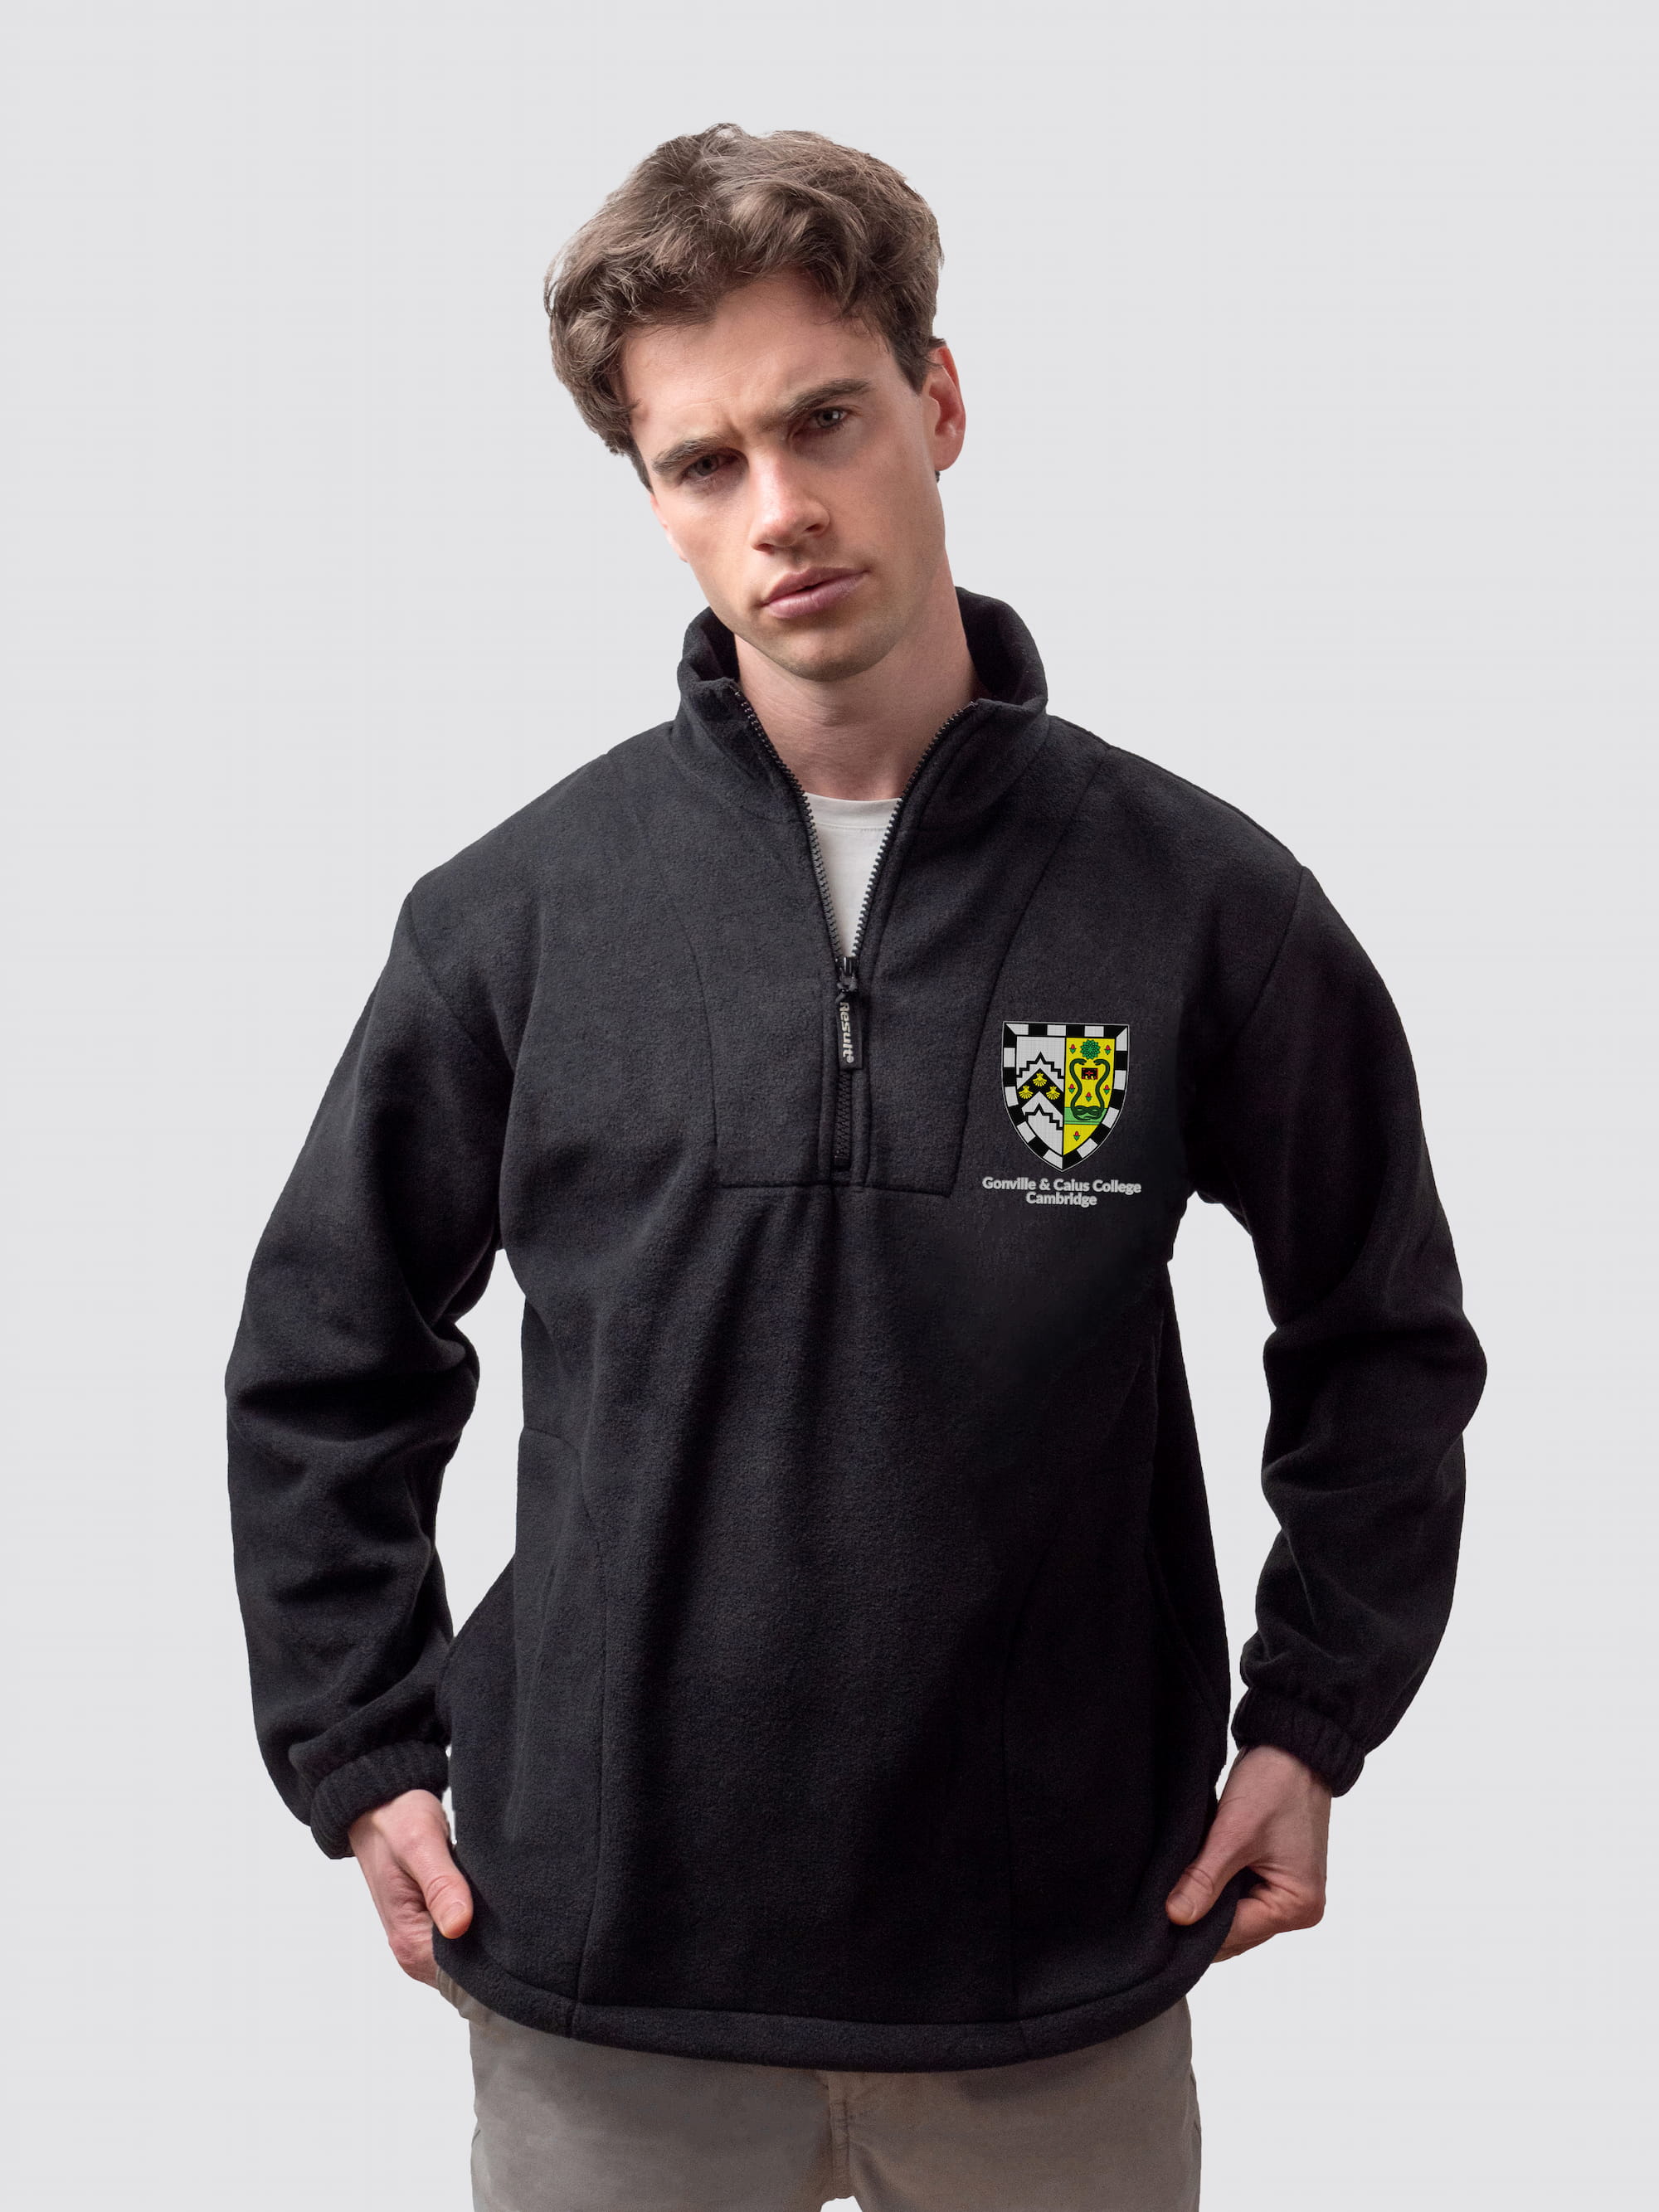 Cambridge university fleece, with custom embroidered initials and Gonville & Caius crest